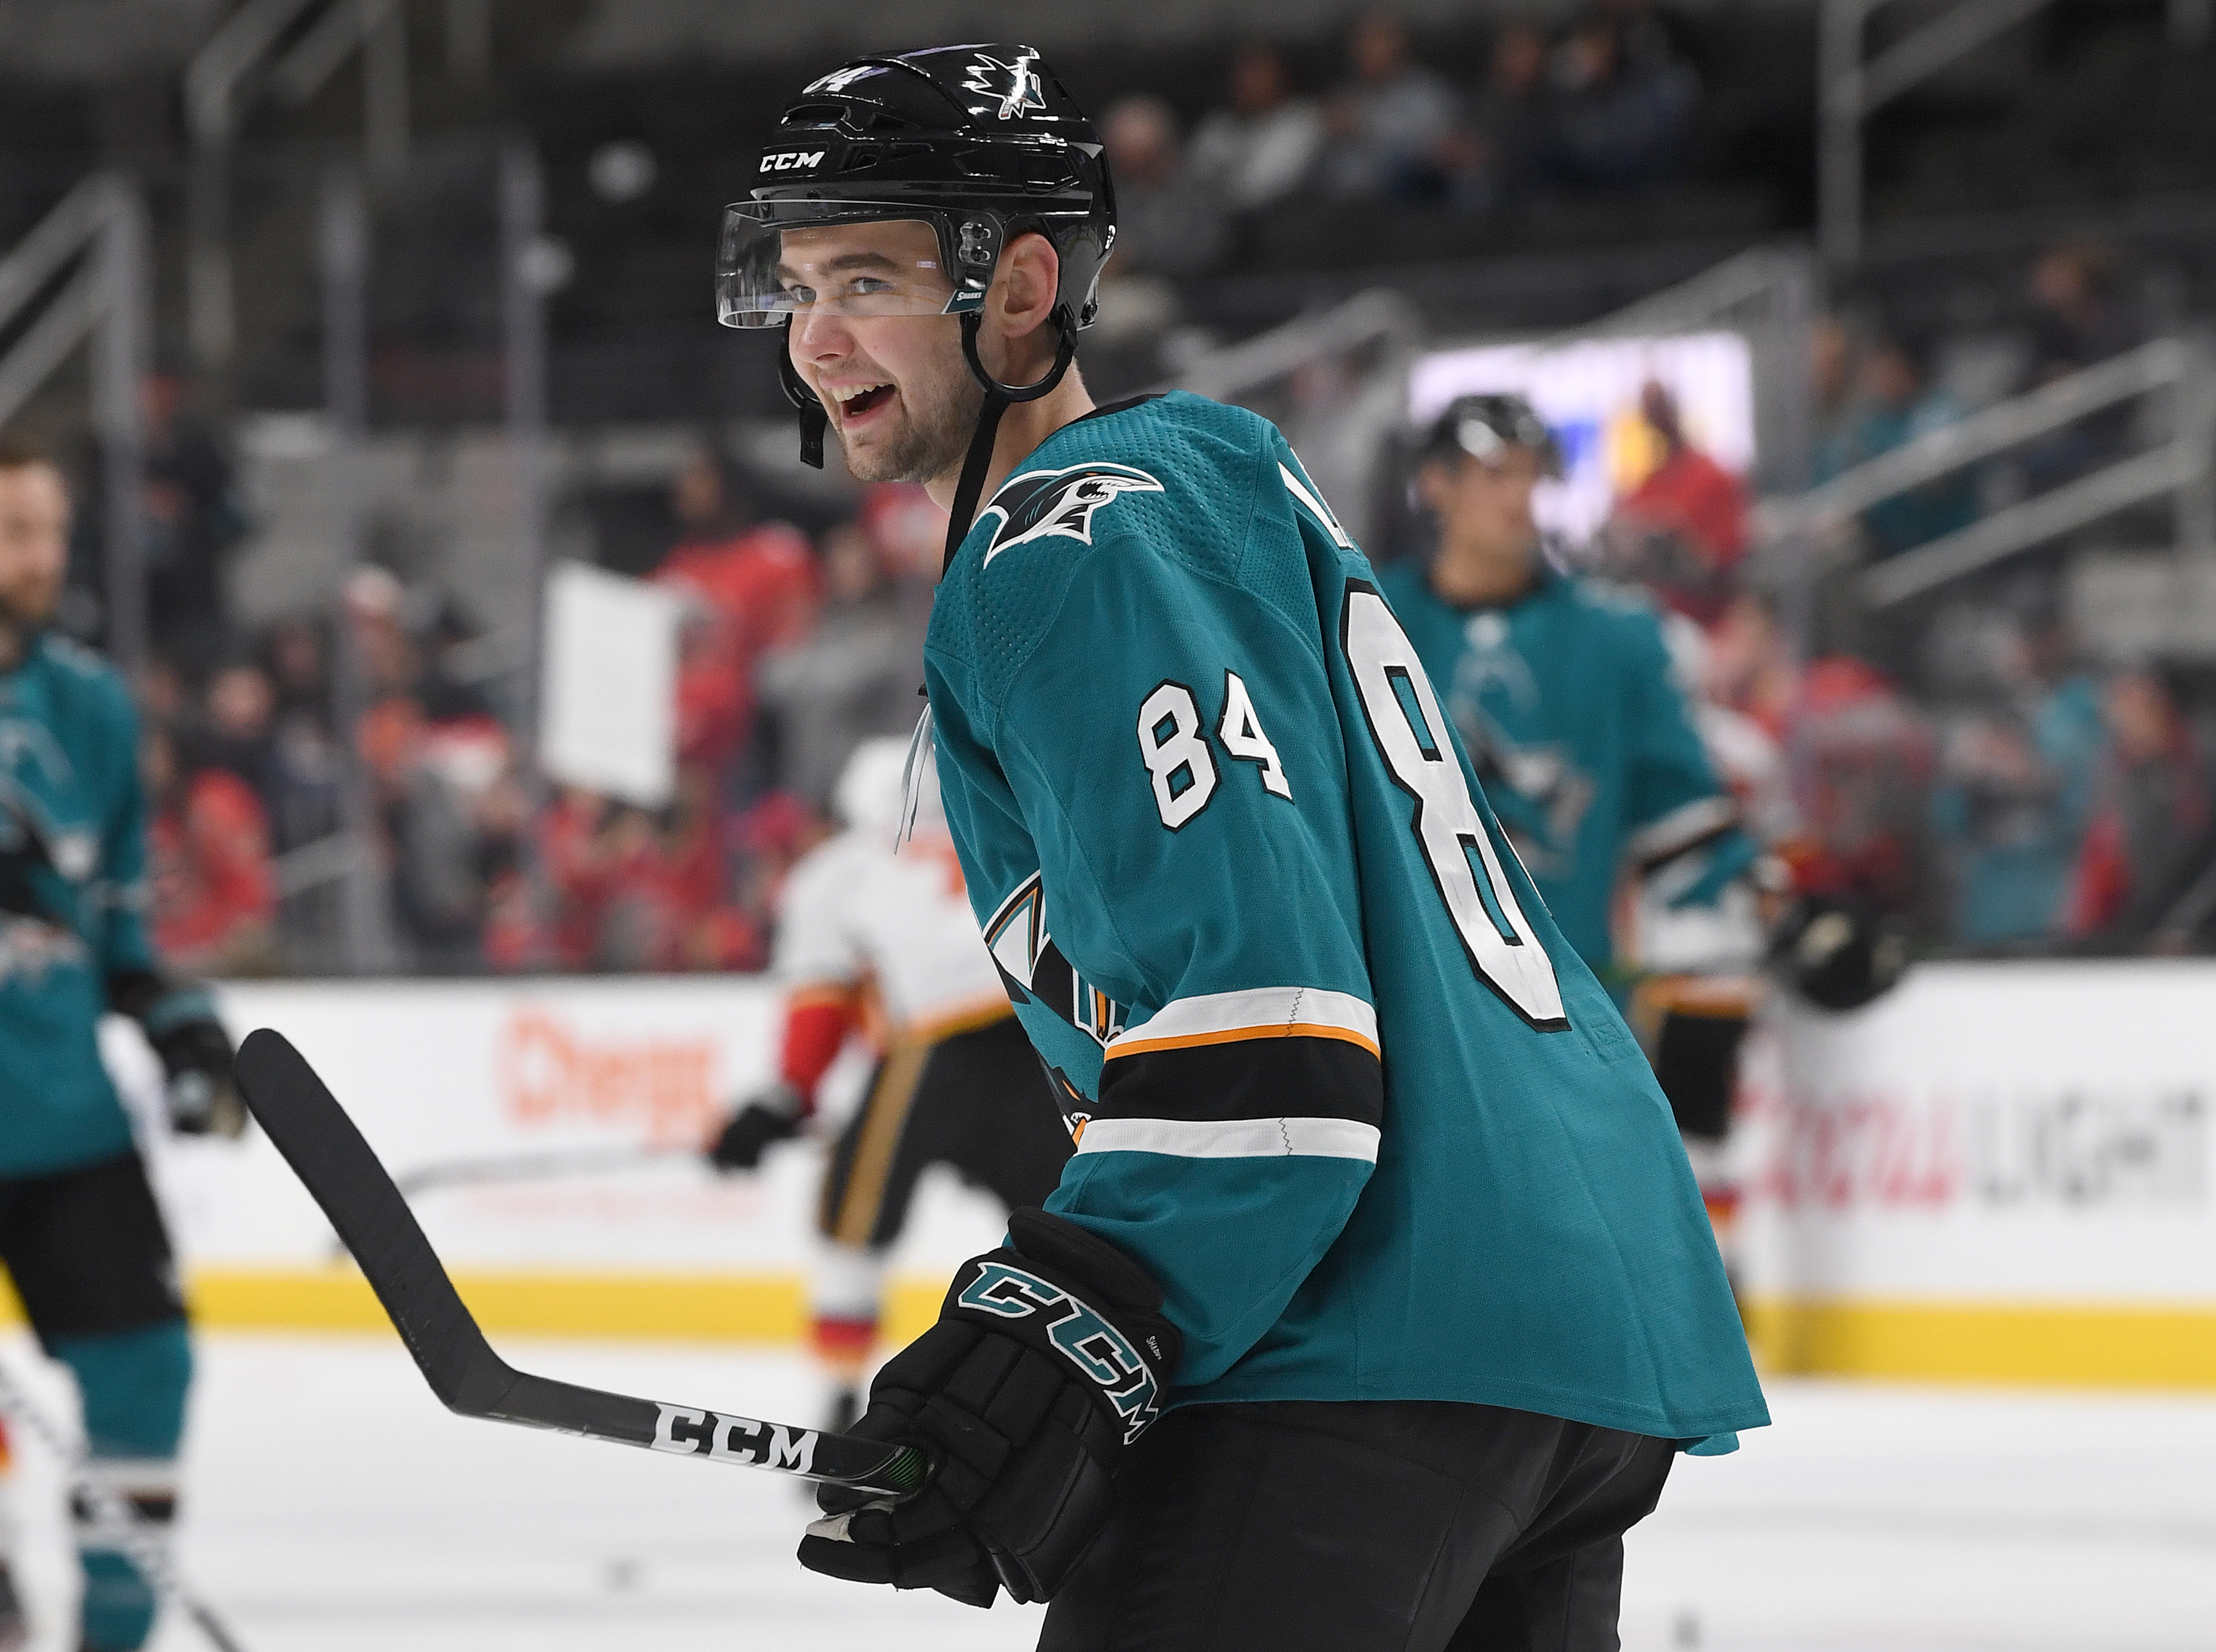 Maxim Letunov #84 of the San Jose Sharks warms up in pregame warm ups prior to the start of an NHL hockey game against the Calgary Flames at SAP Center on February 10, 2020 in San Jose, California.